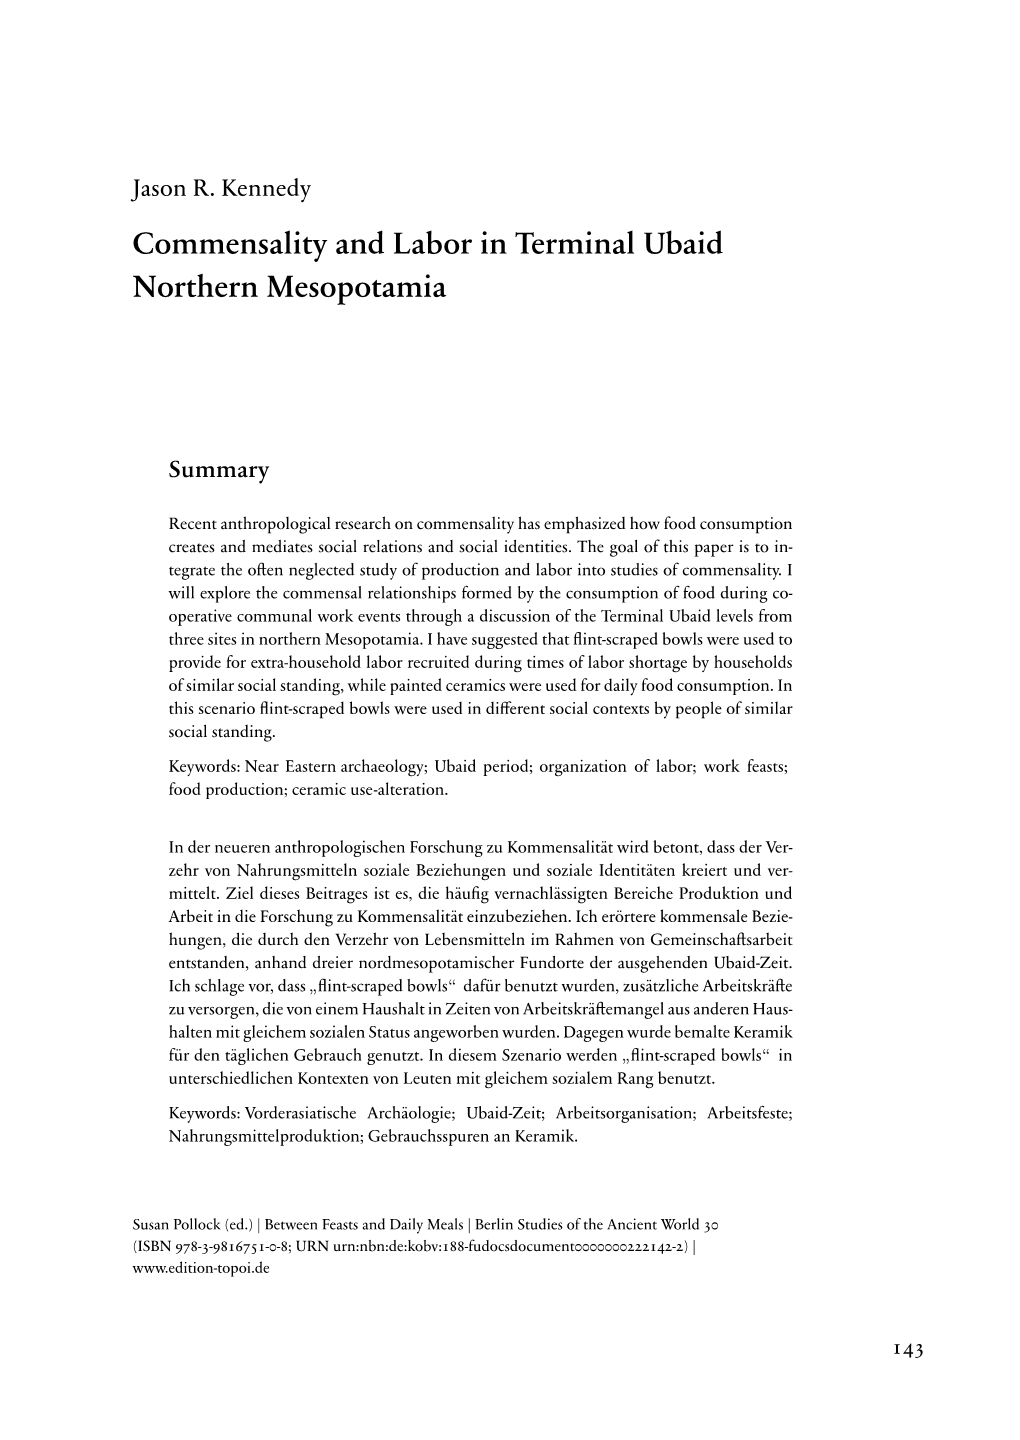 Commensality and Labor in Terminal Ubaid Northern Mesopotamia